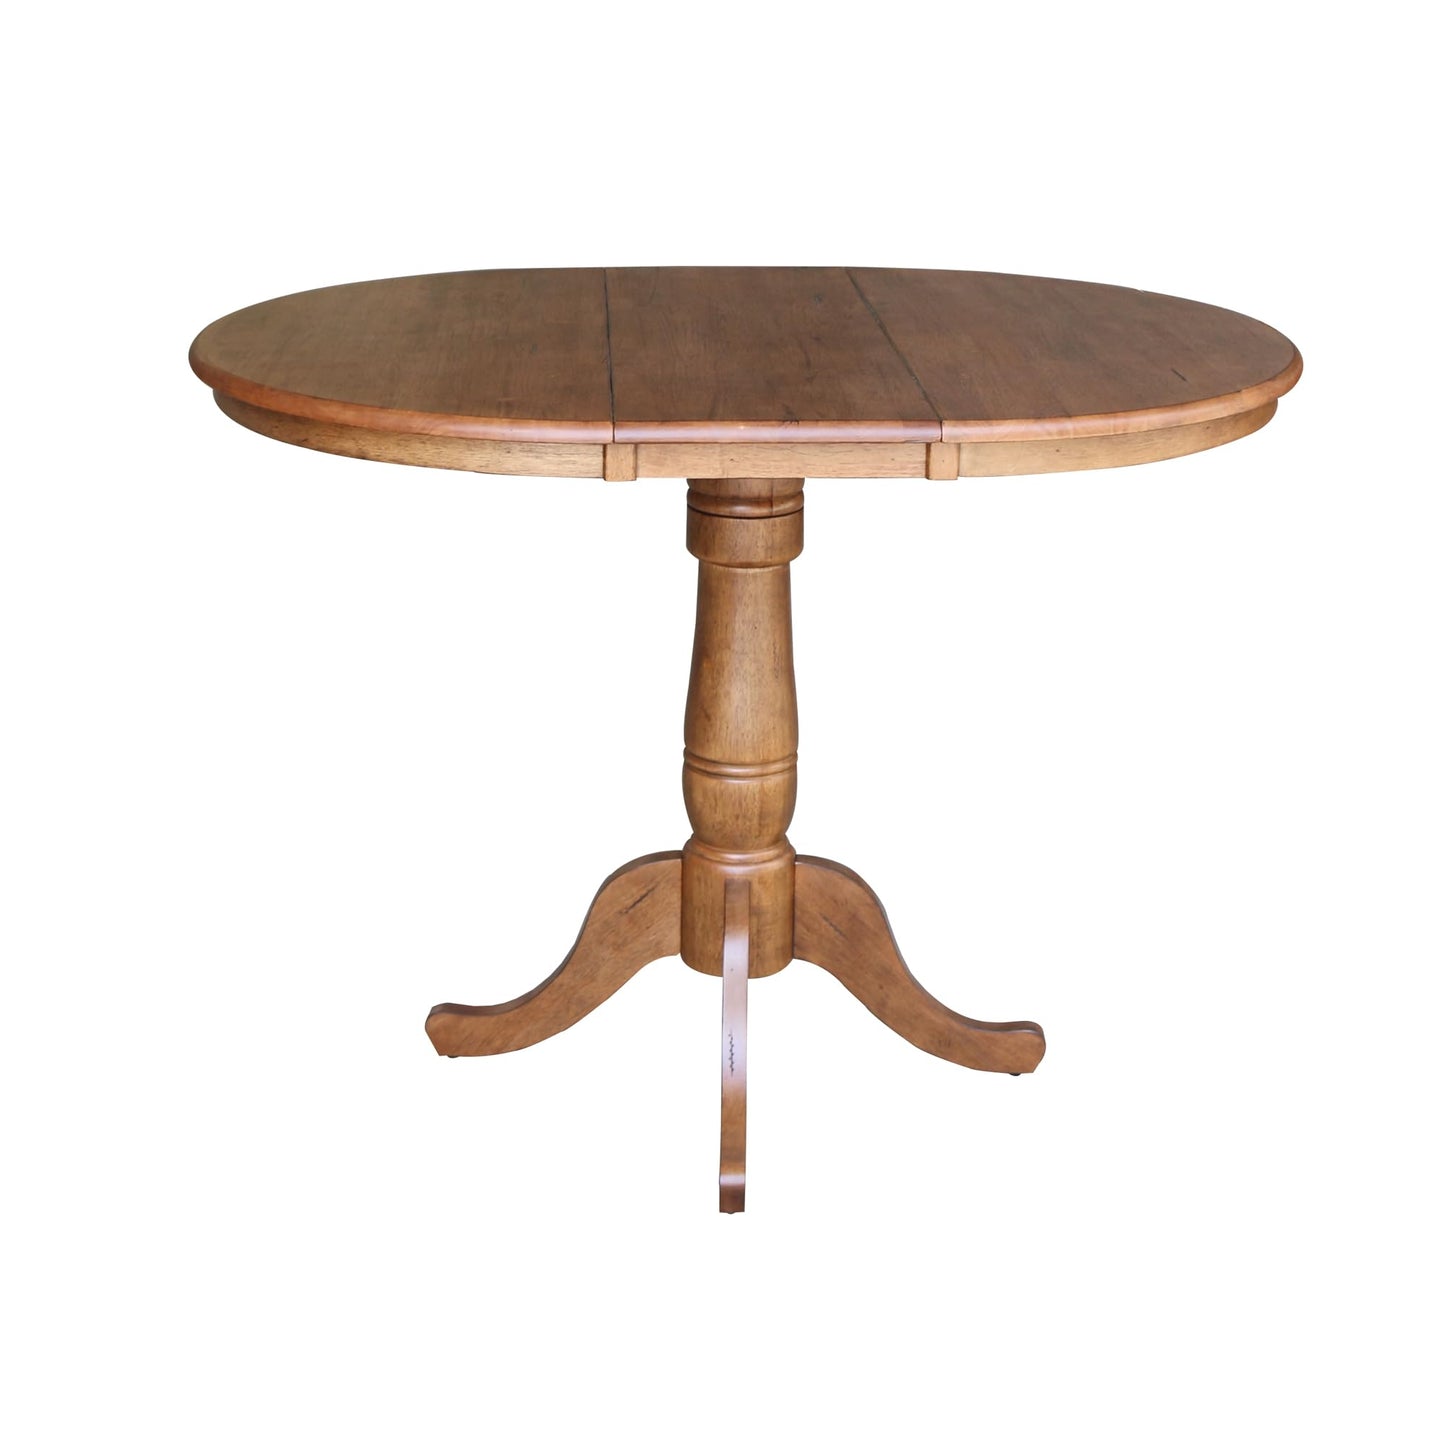 IC International Concepts 36" Round Top Pedestal 12" Leaf-35.3" H Dining Table, Distressed Oak